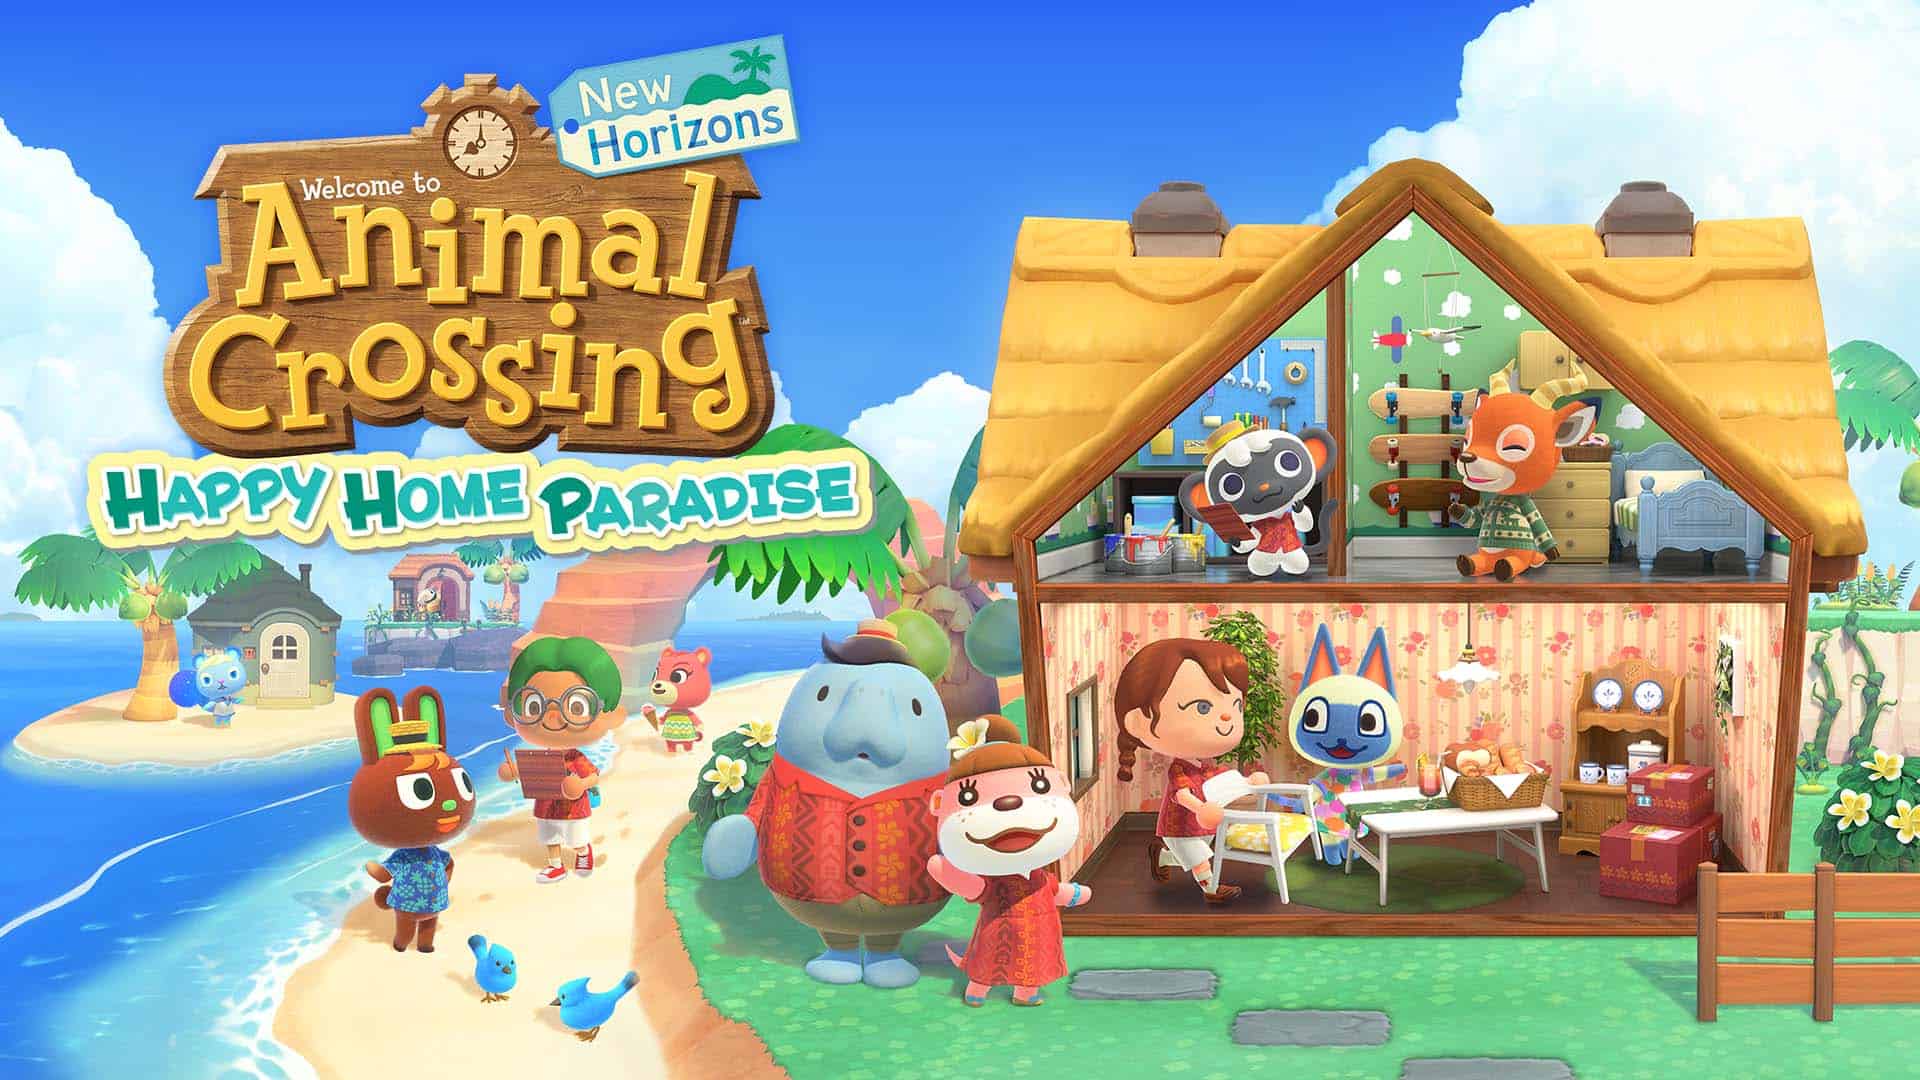 Animal Crossing: New Horizons to get Happy Home Paradise paid DLC next month